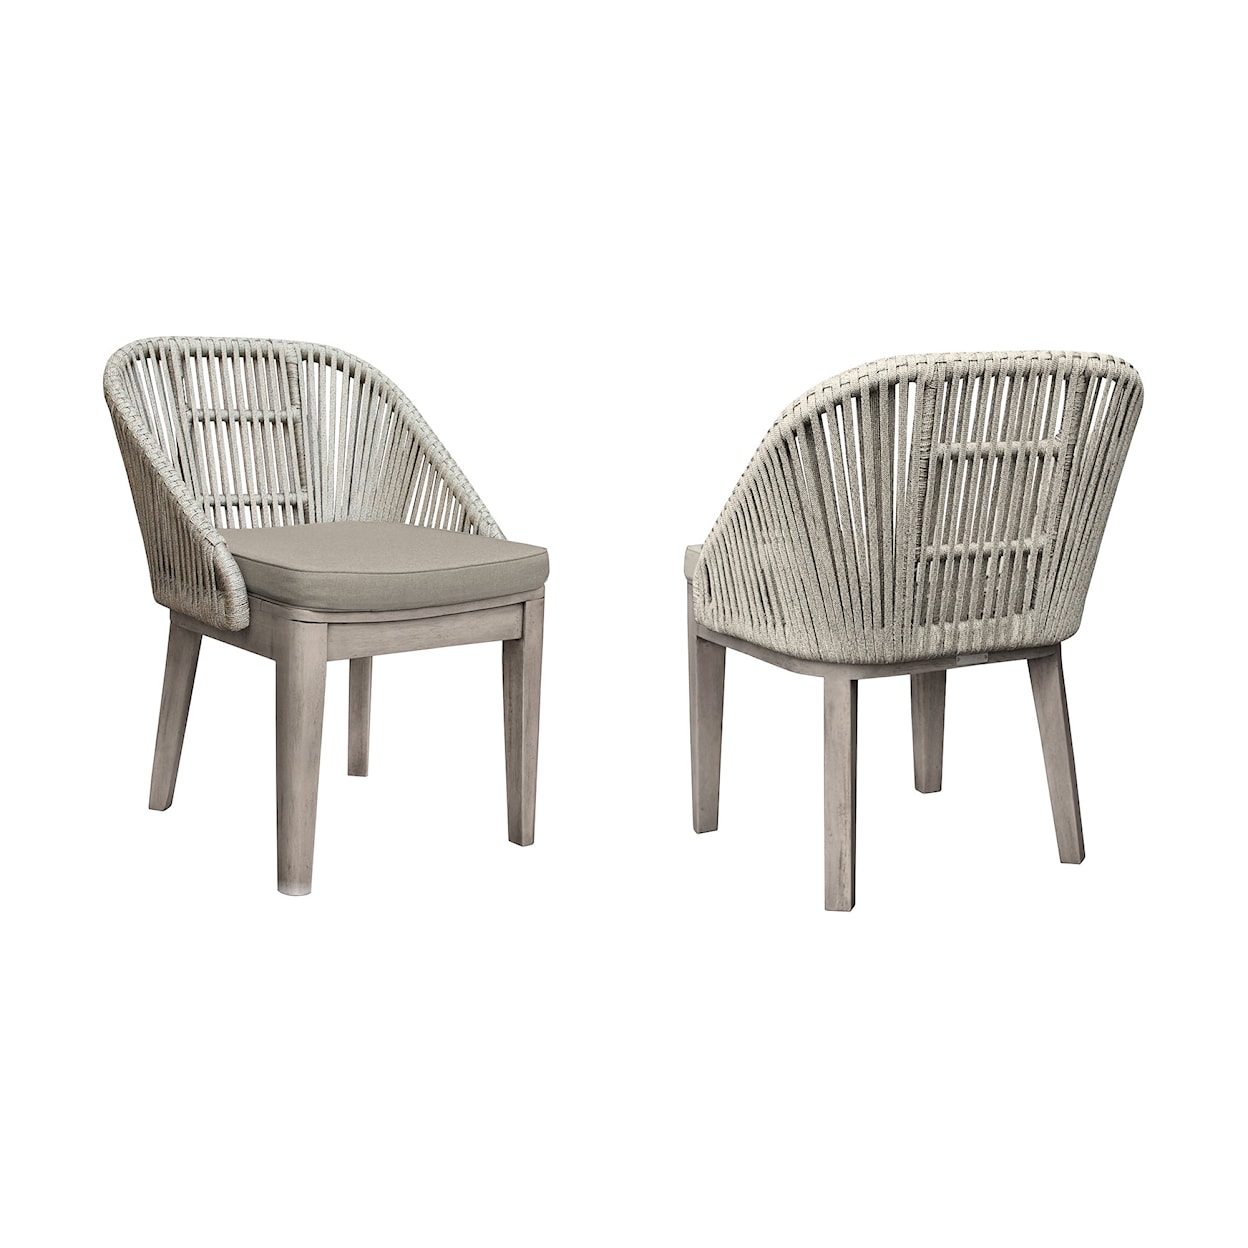 Armen Living Haiti Set of 2 Outdoor Side Chairs